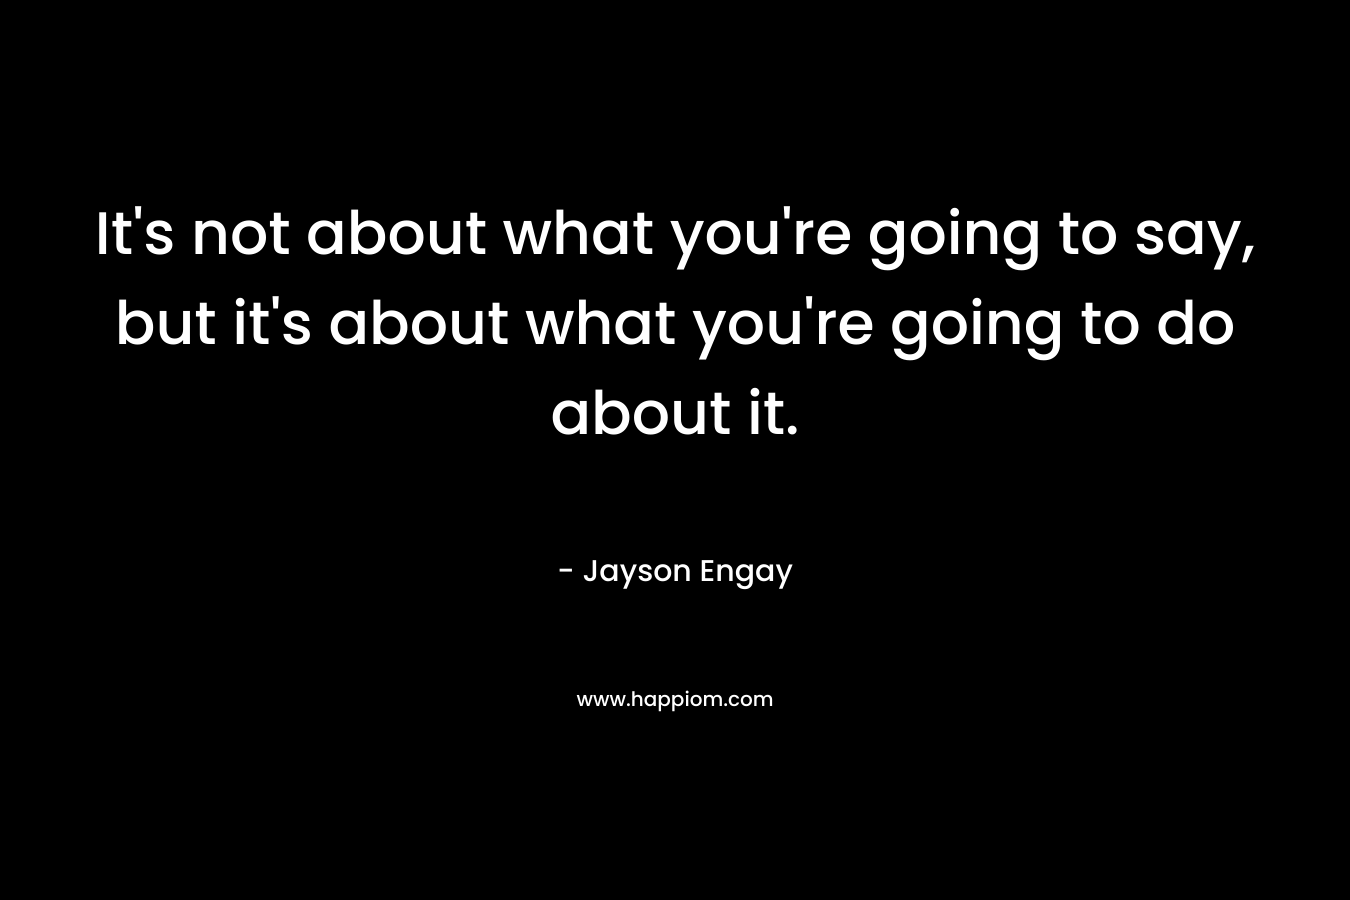 It's not about what you're going to say, but it's about what you're going to do about it.